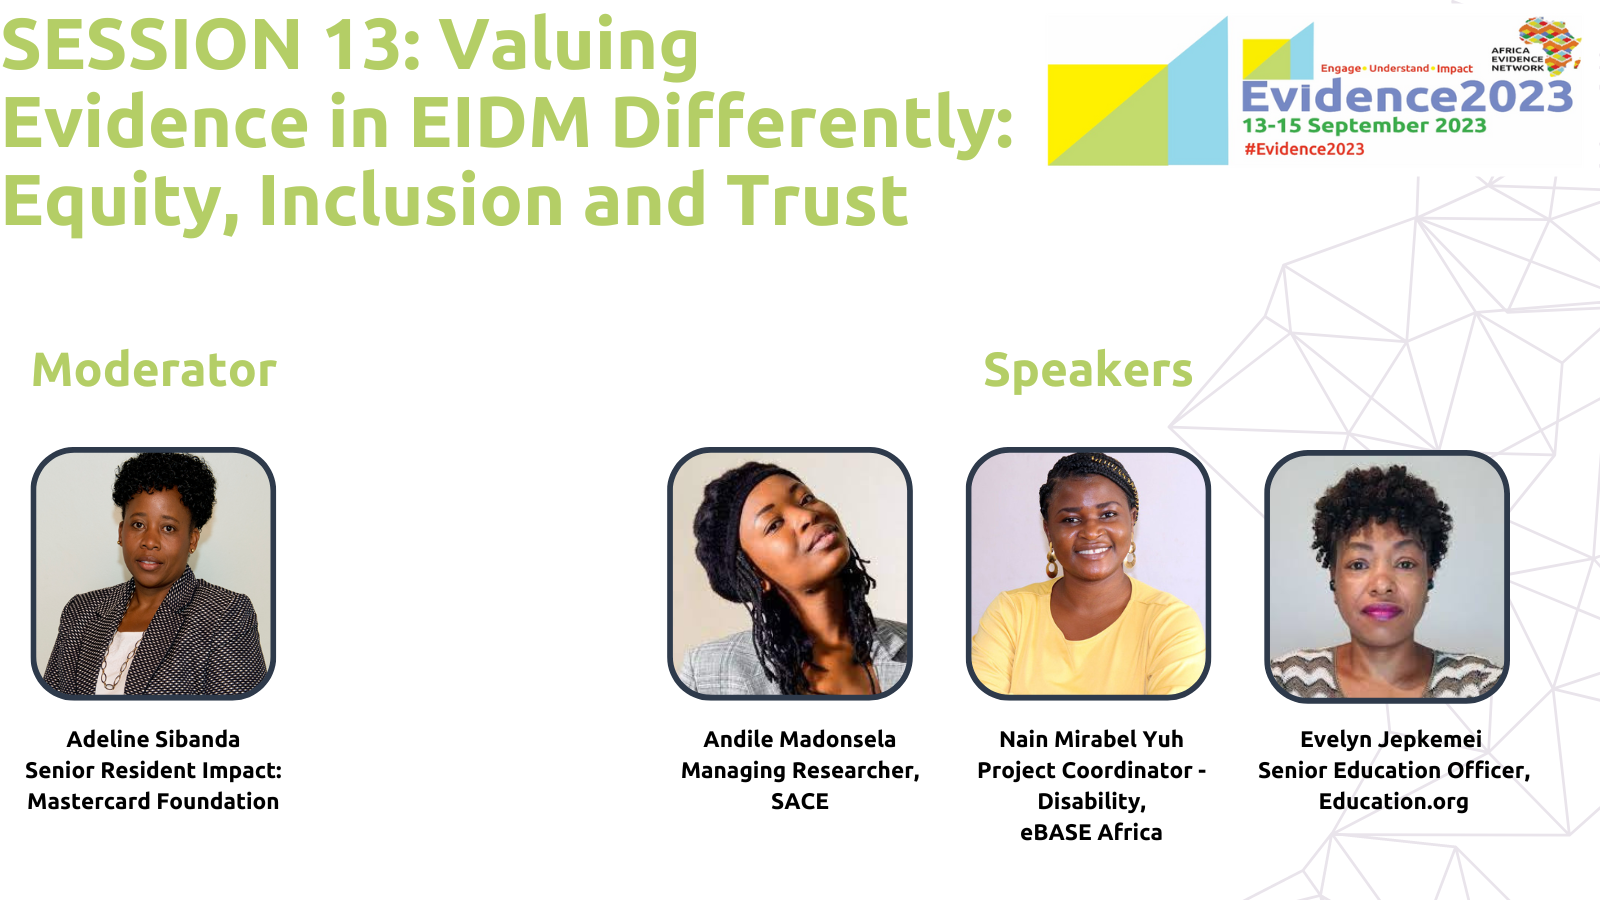 PRESENTATION | Valuing Evidence in EIDM Differently: Equity Inclusion and Trust - PACE